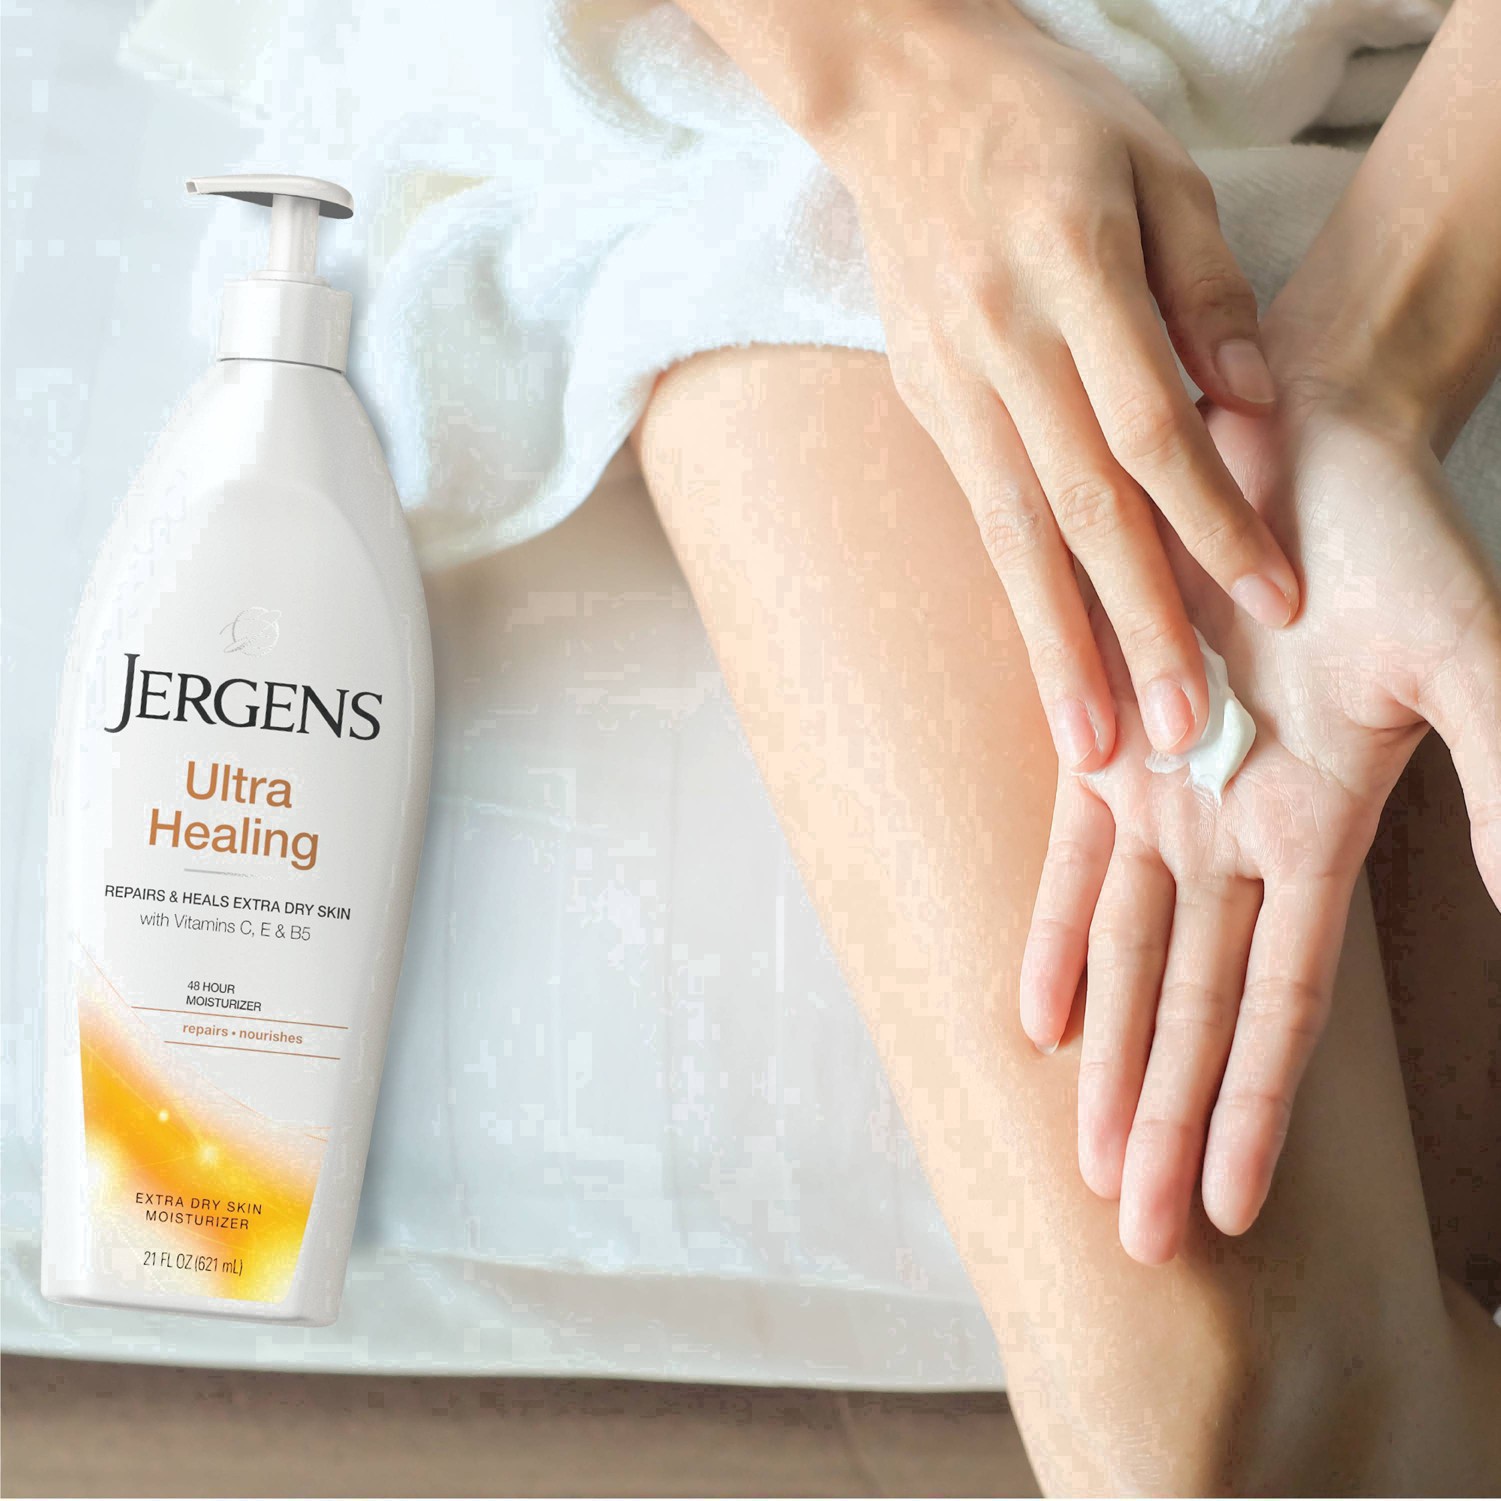 slide 42 of 67, Jergens Hand and Body Lotion, Dry Skin Moisturizer with Vitamins C,E, and B5, 21 fl oz